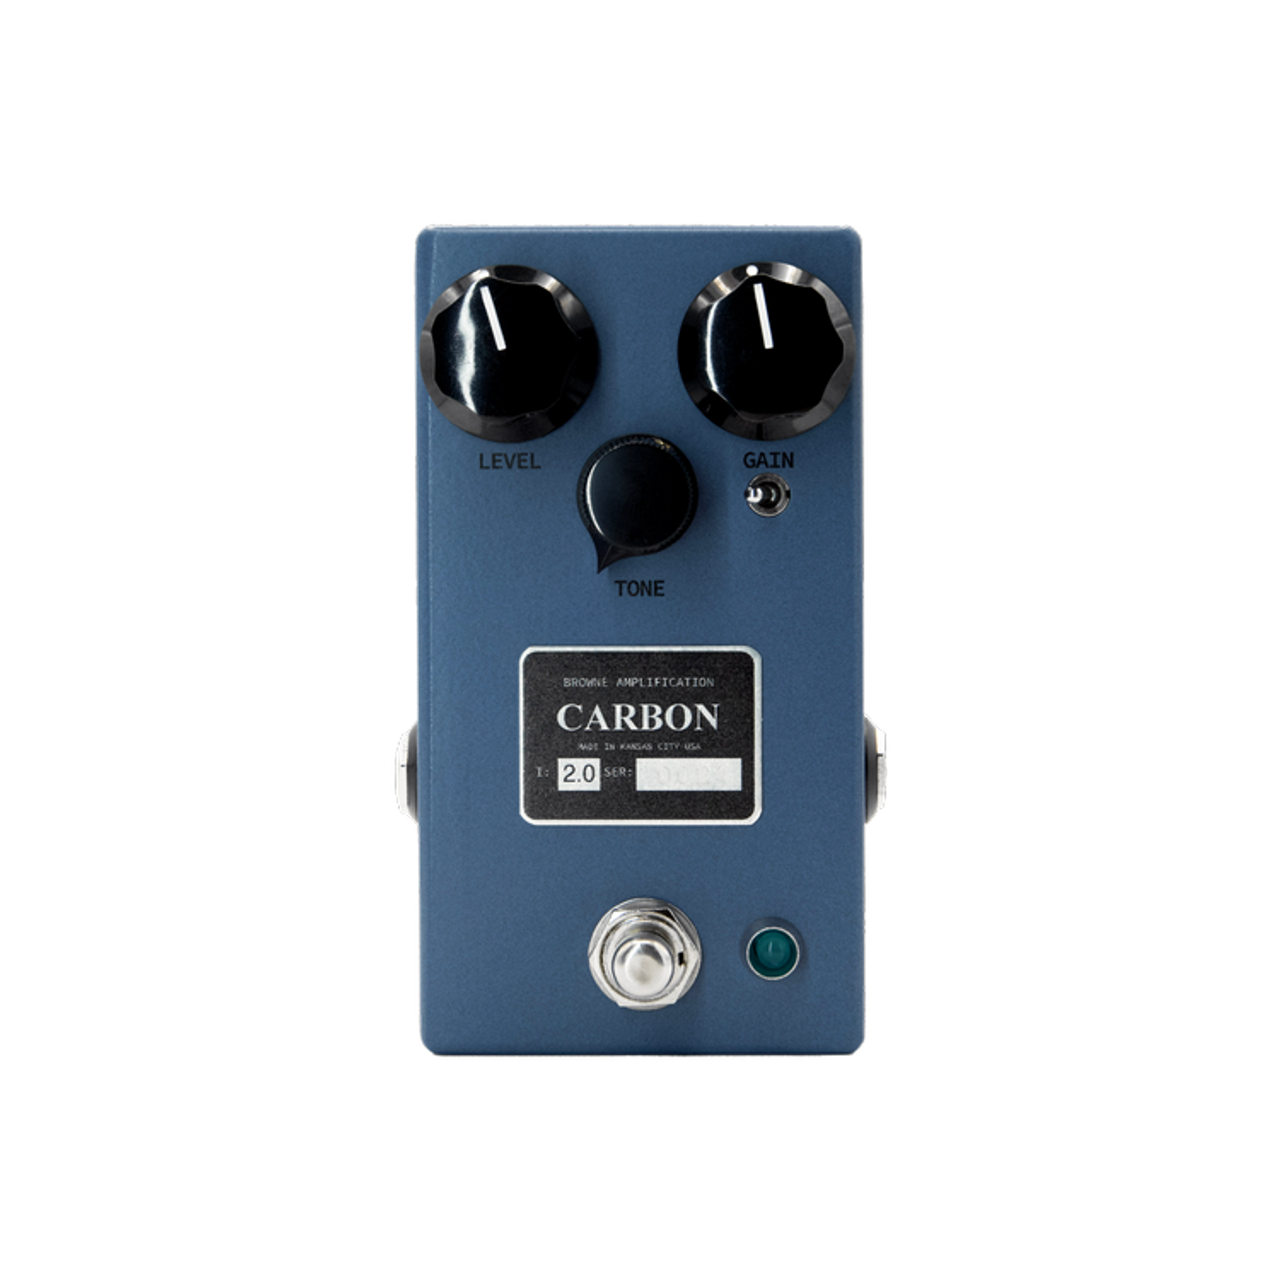 Browne Amplification Carbon v2 Overdrive Pedal in Sky Blue